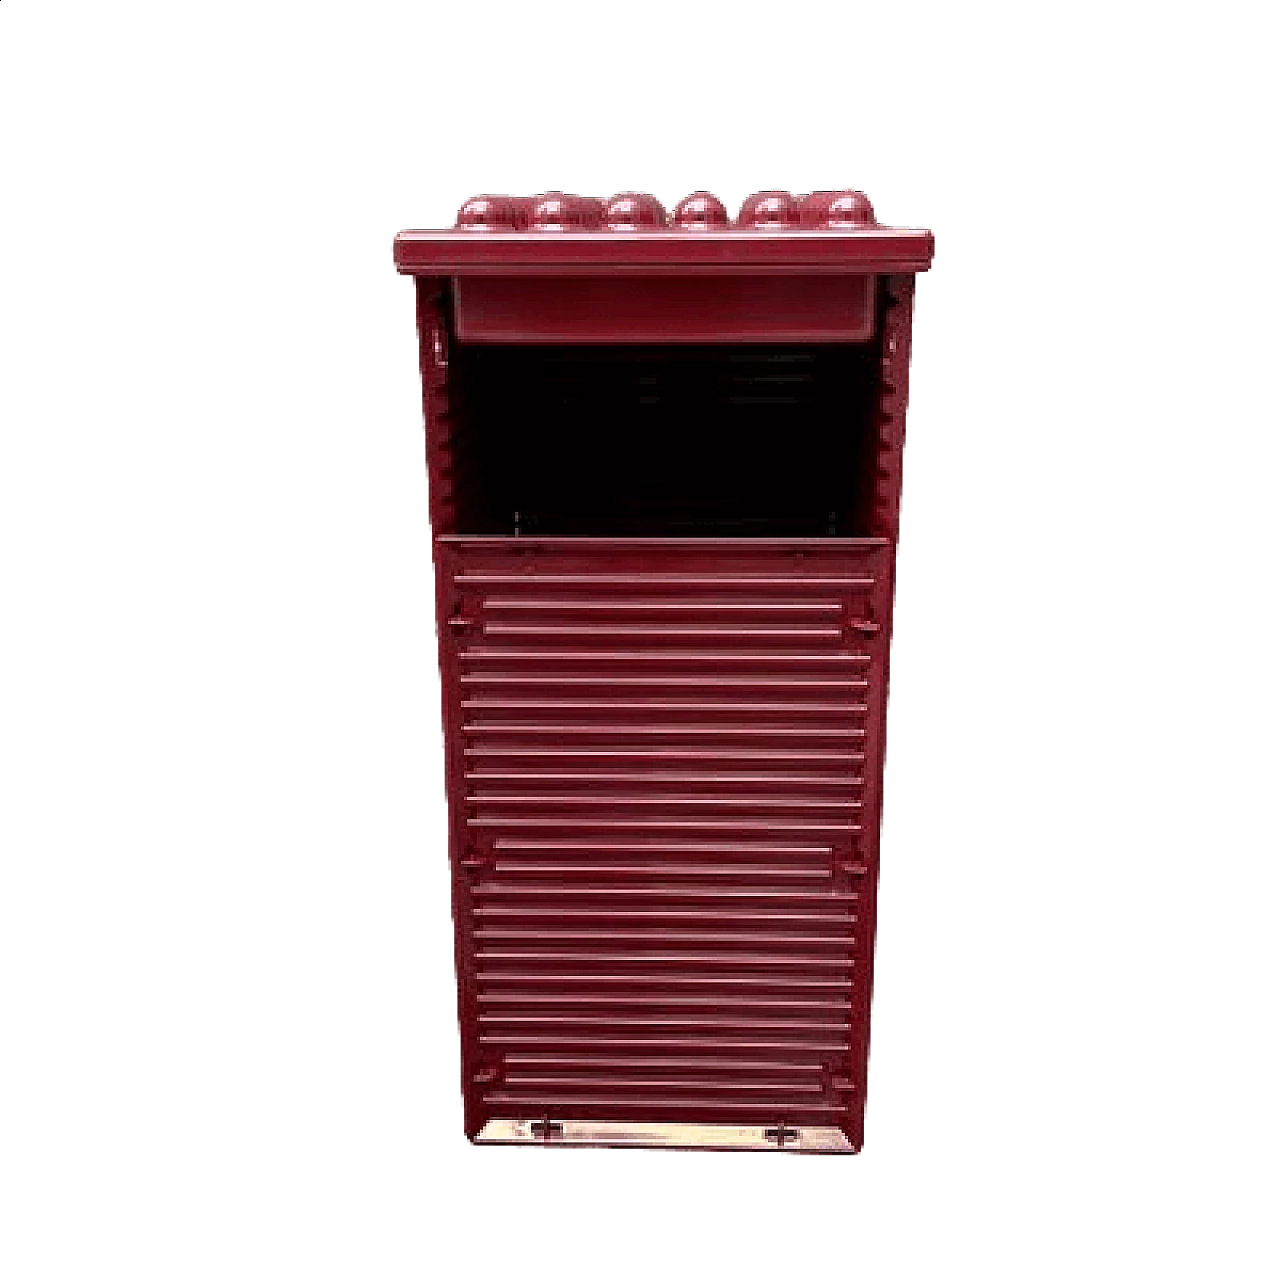 Synthesis 45 waste basket with ashtray by Ettore Sottsass for Olivetti, 1970s 8